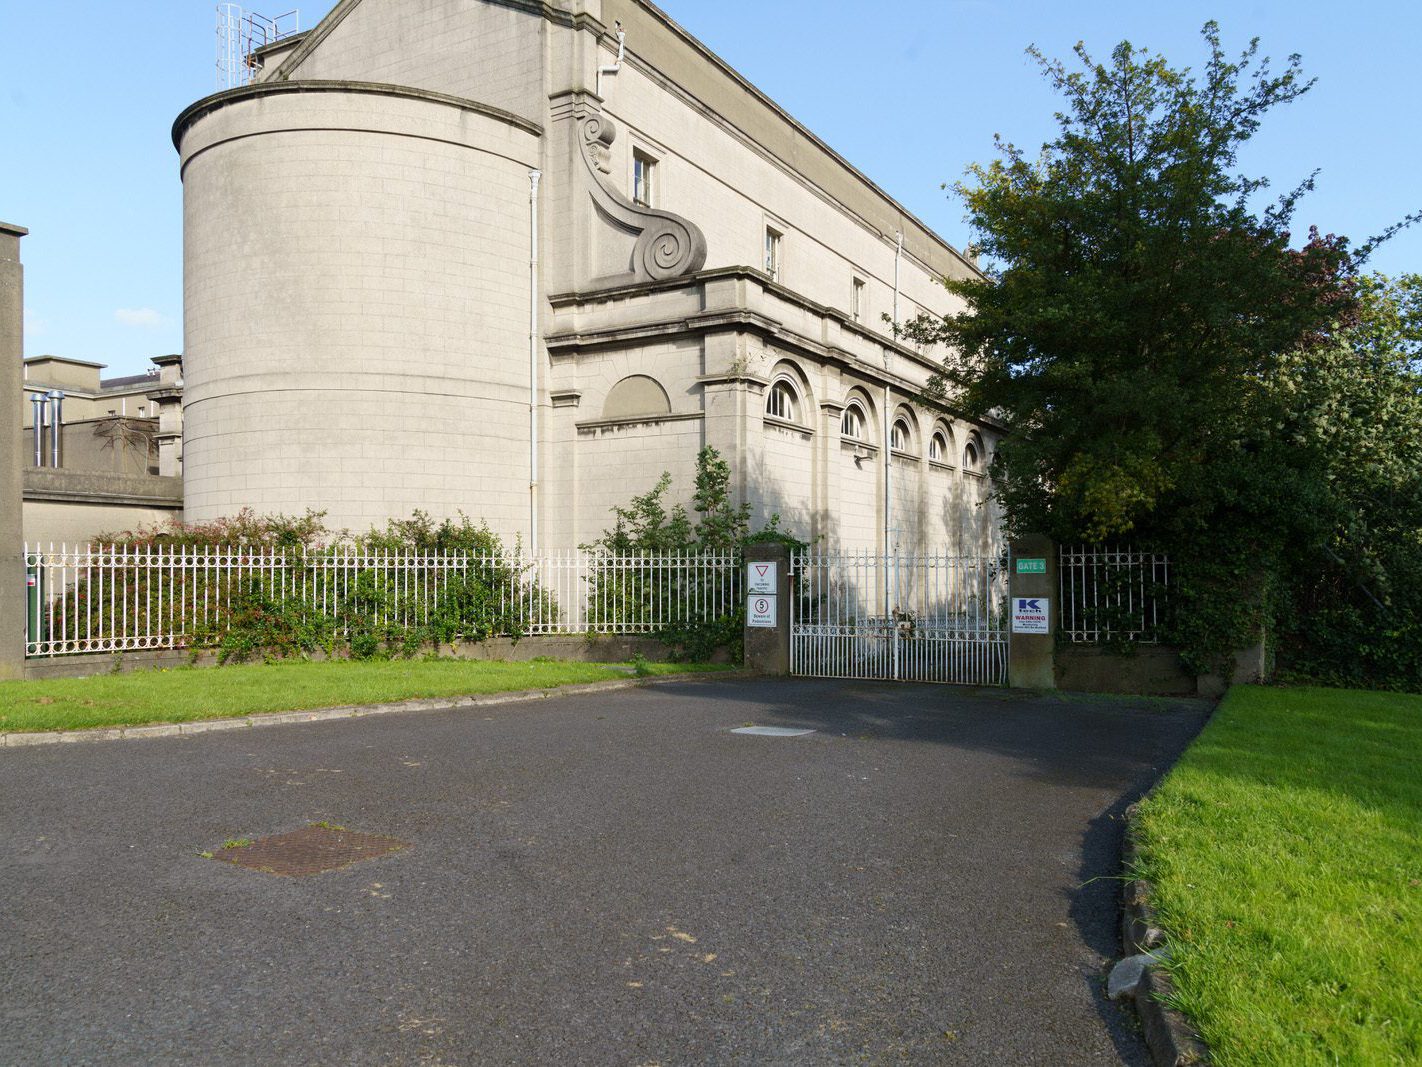 HOLY CROSS COLLEGE - ALSO KNOWN AS CLONLIFFE COLLEGE [THIS HAS CEASED SINCE MY LAST VISIT IN 2014] 011